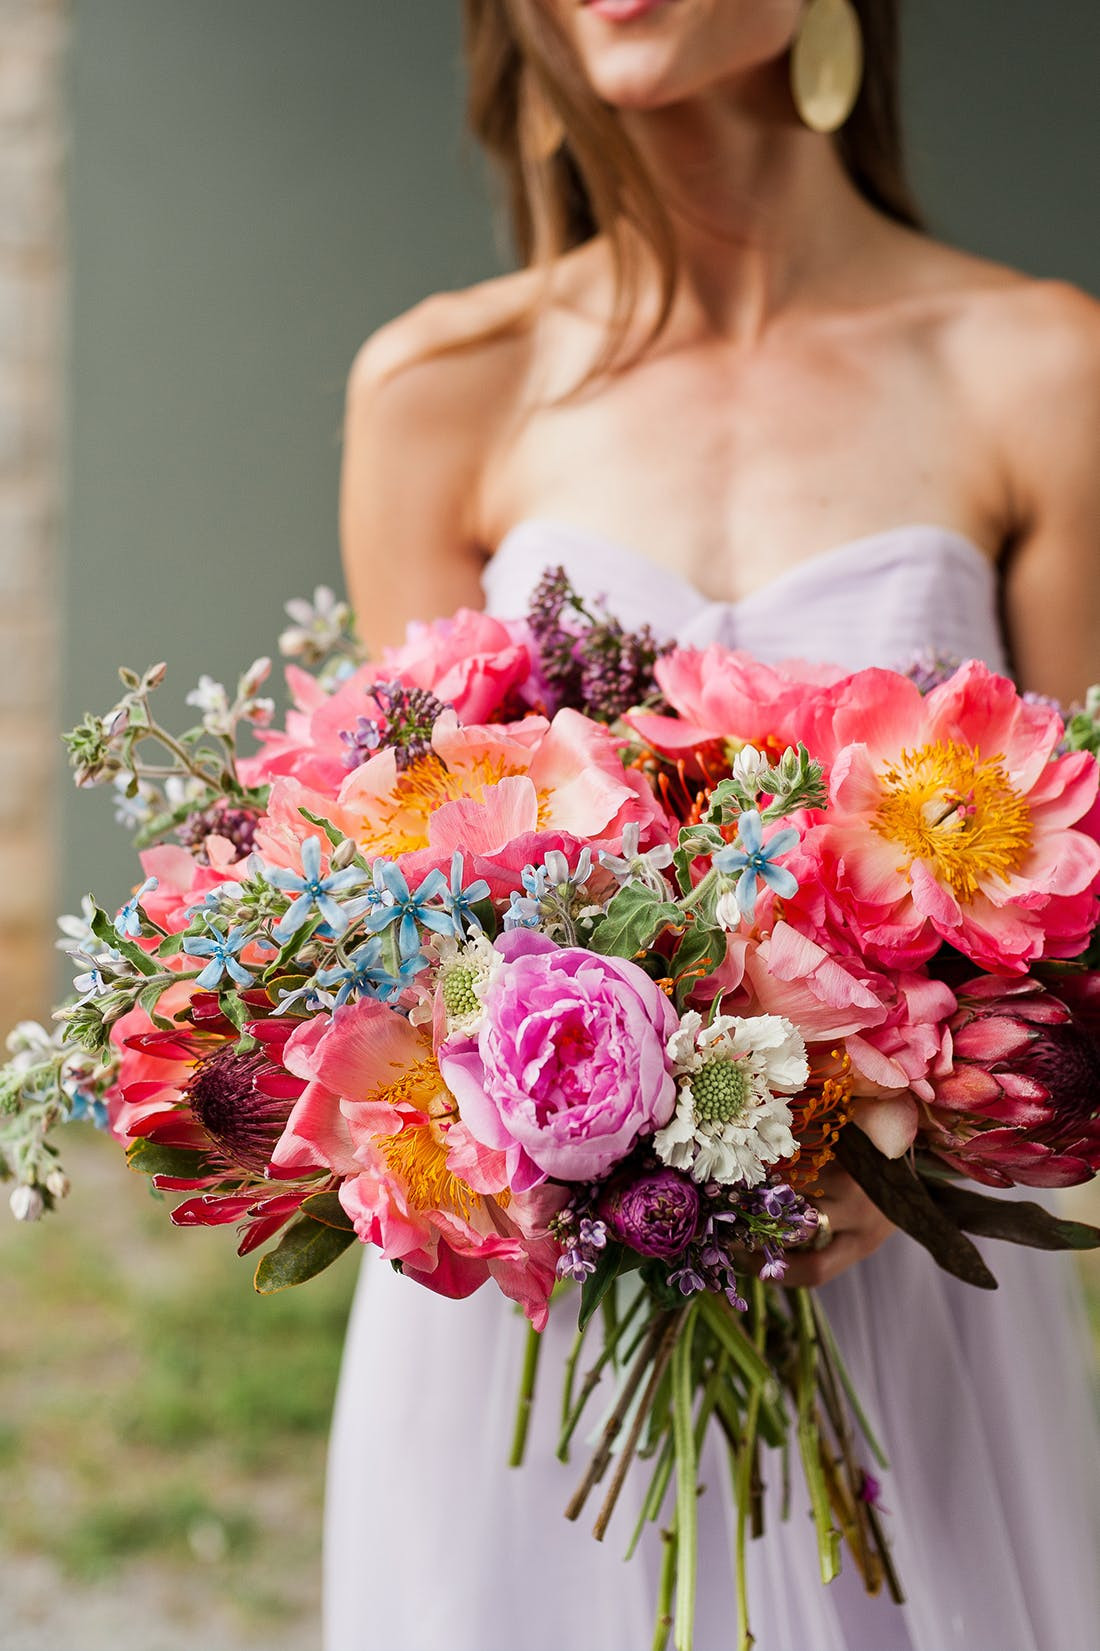 Wedding Bouquet DIY
 Check Out This Stunning Wedding Bouquet You Can DIY